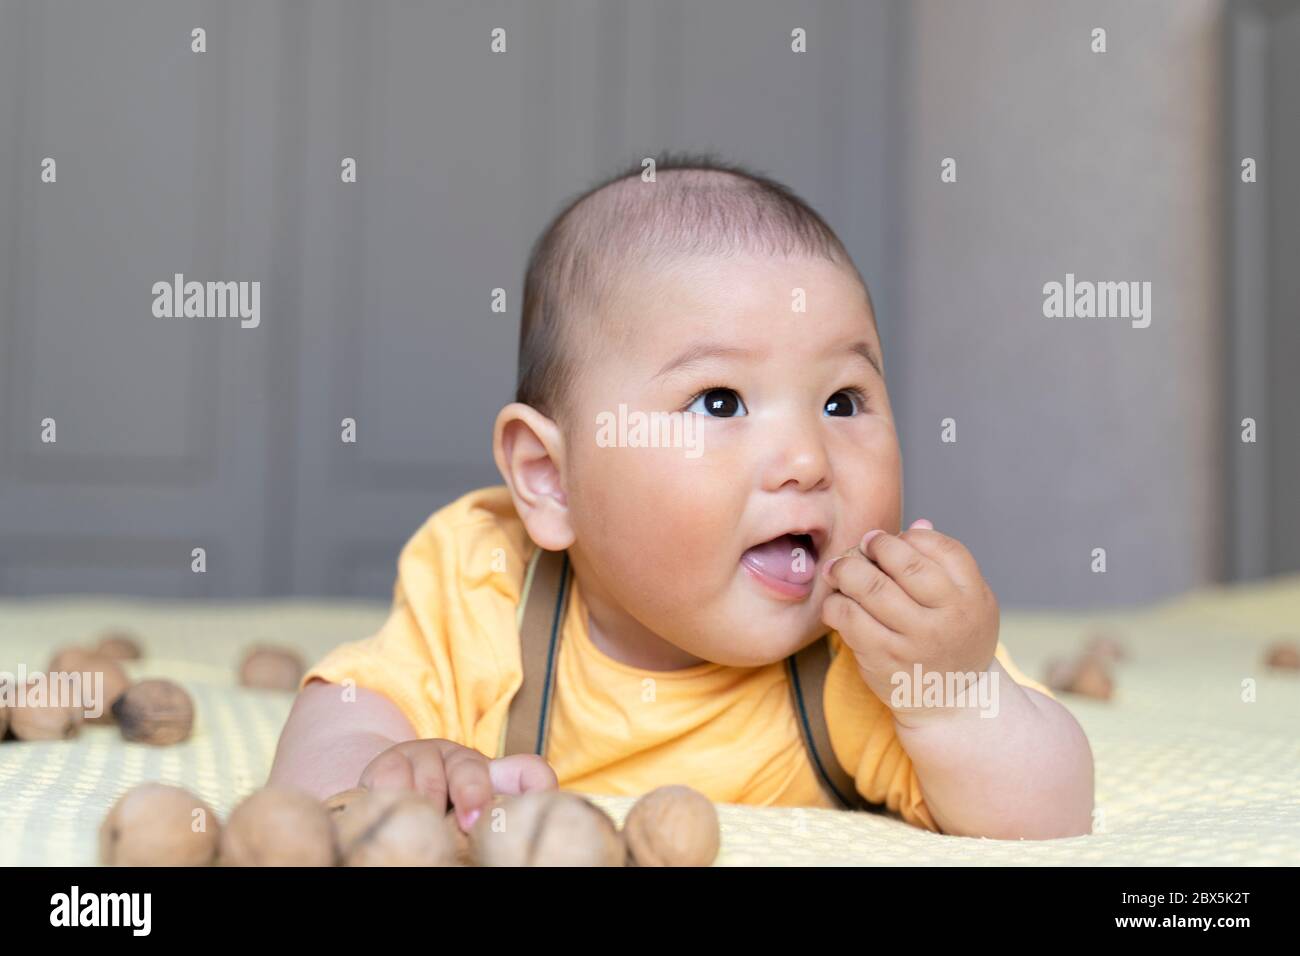 cute fat baby eating